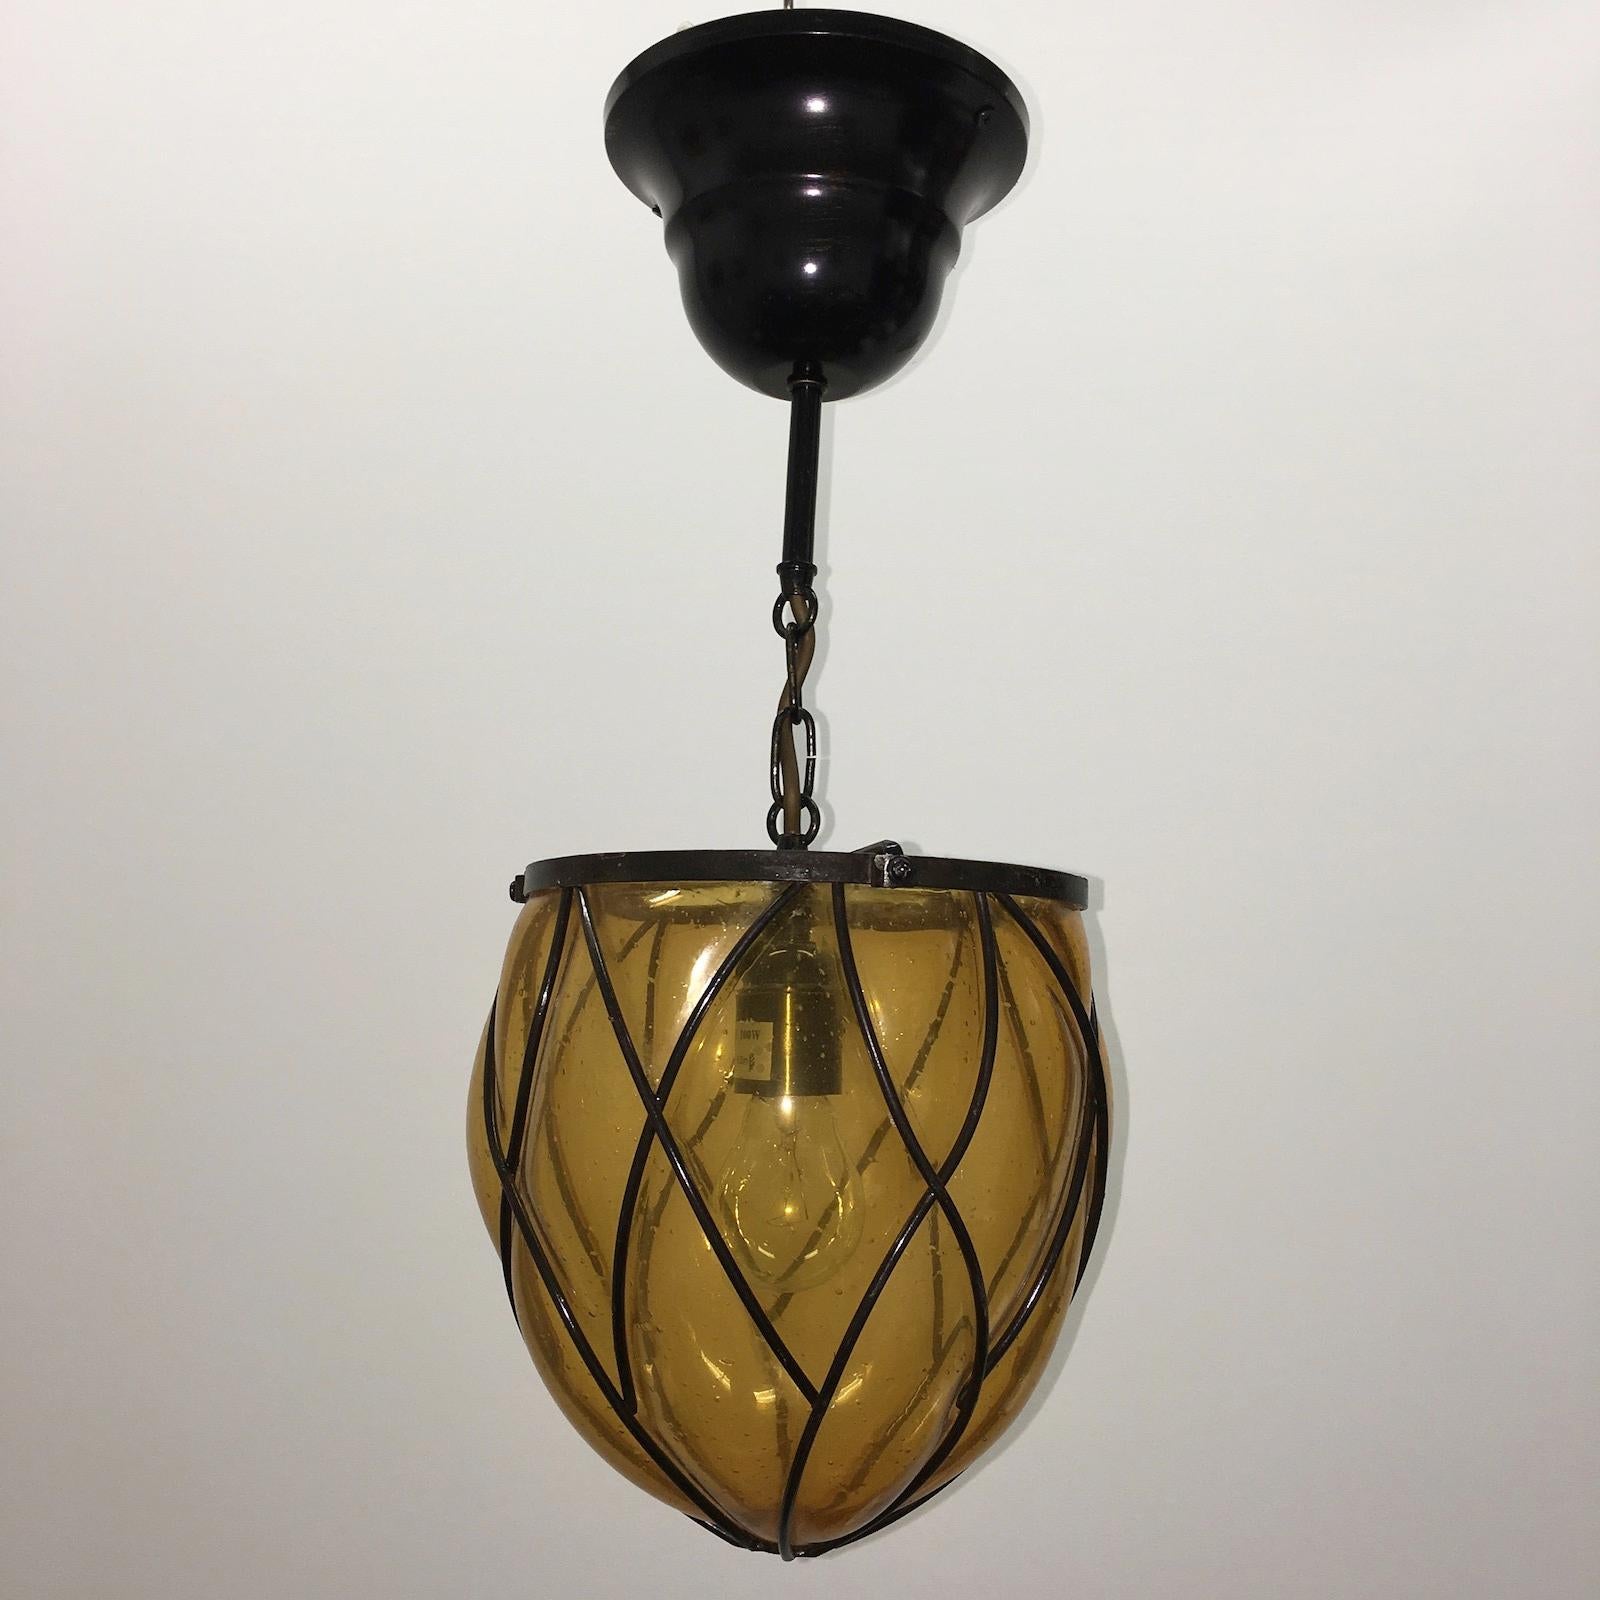 Beautiful iron and amber bubble glass hall lantern pendant. Nice addition to every home or house. This light fixture remains in very good vintage condition with wear to the glass and some patina to the Iron frame. The fixture requires one European